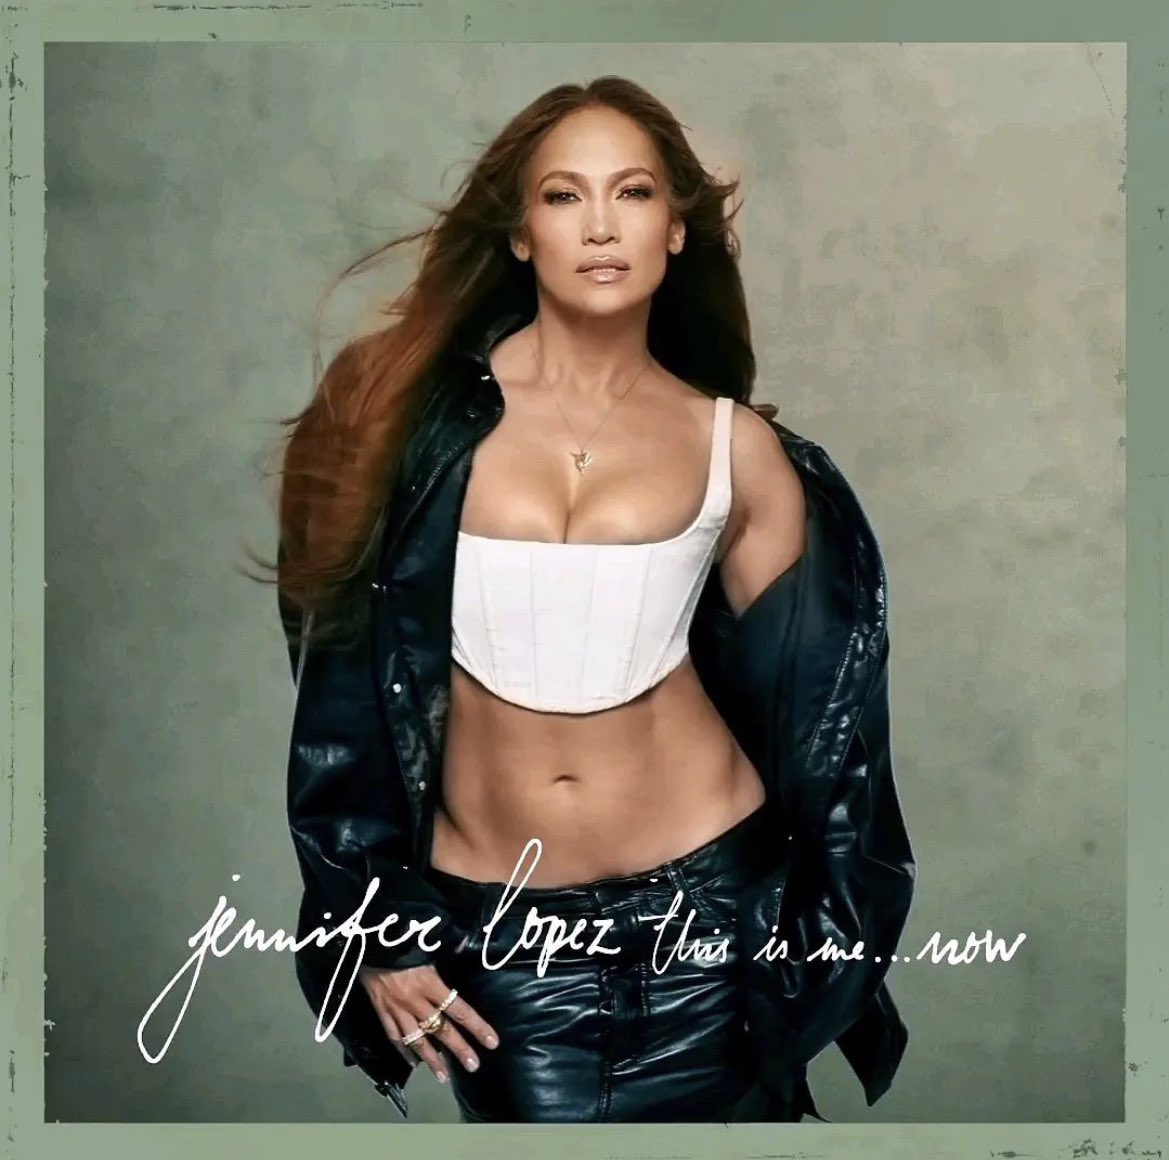 US: Jennifer Lopez announces release date of new album and accompanying film, This Is Me... Now